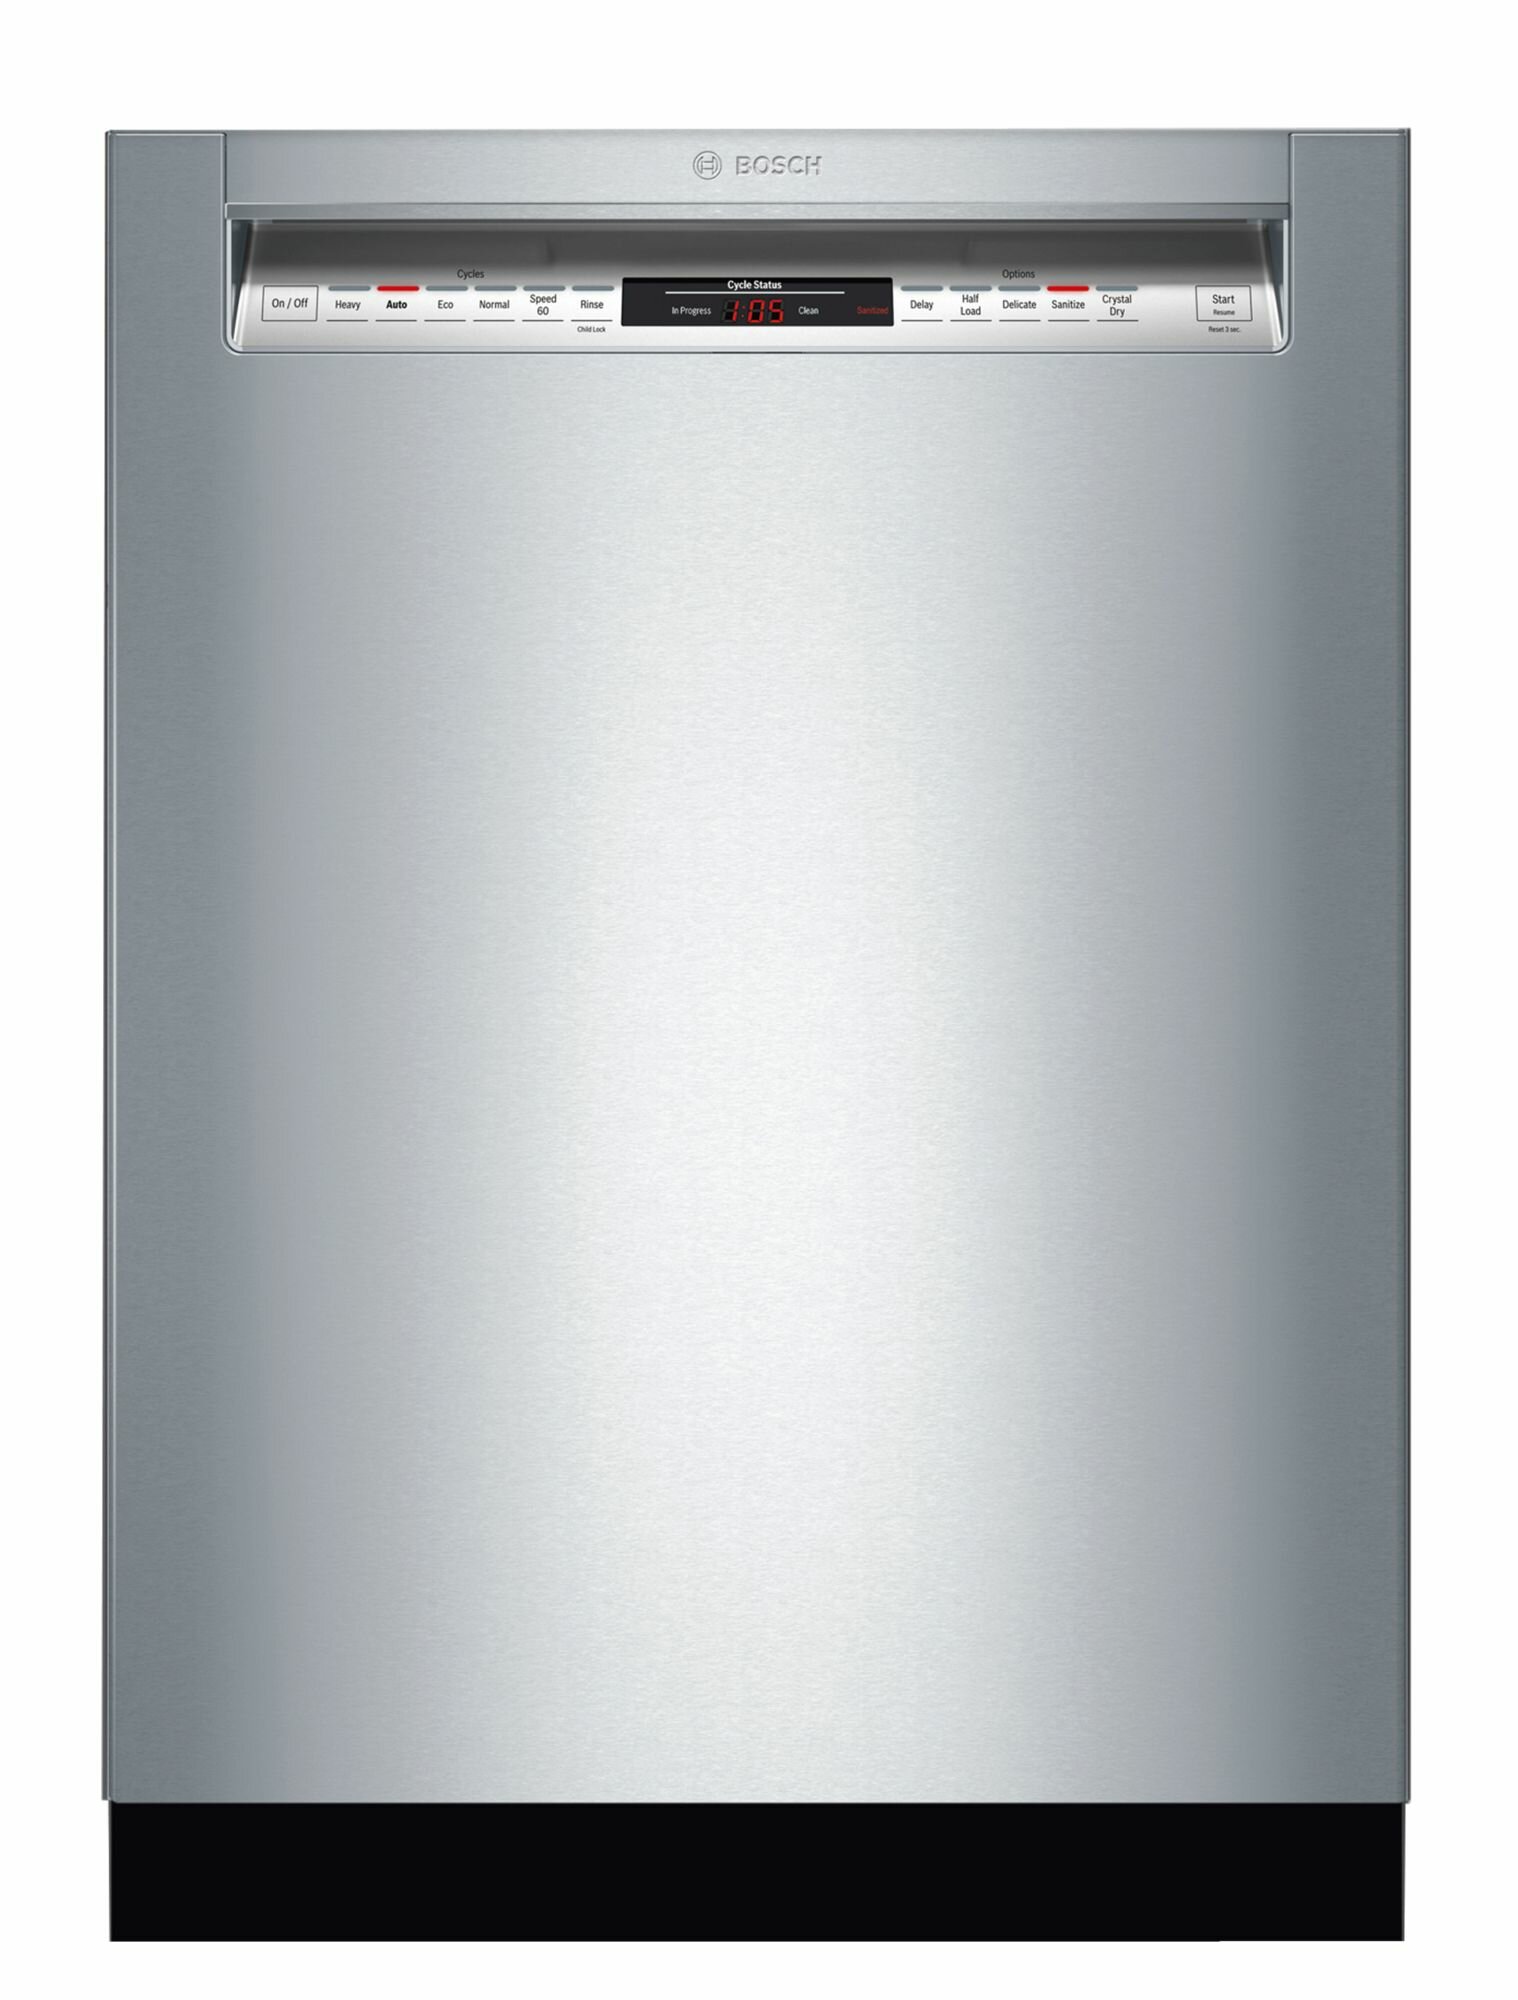 most expensive bosch dishwasher